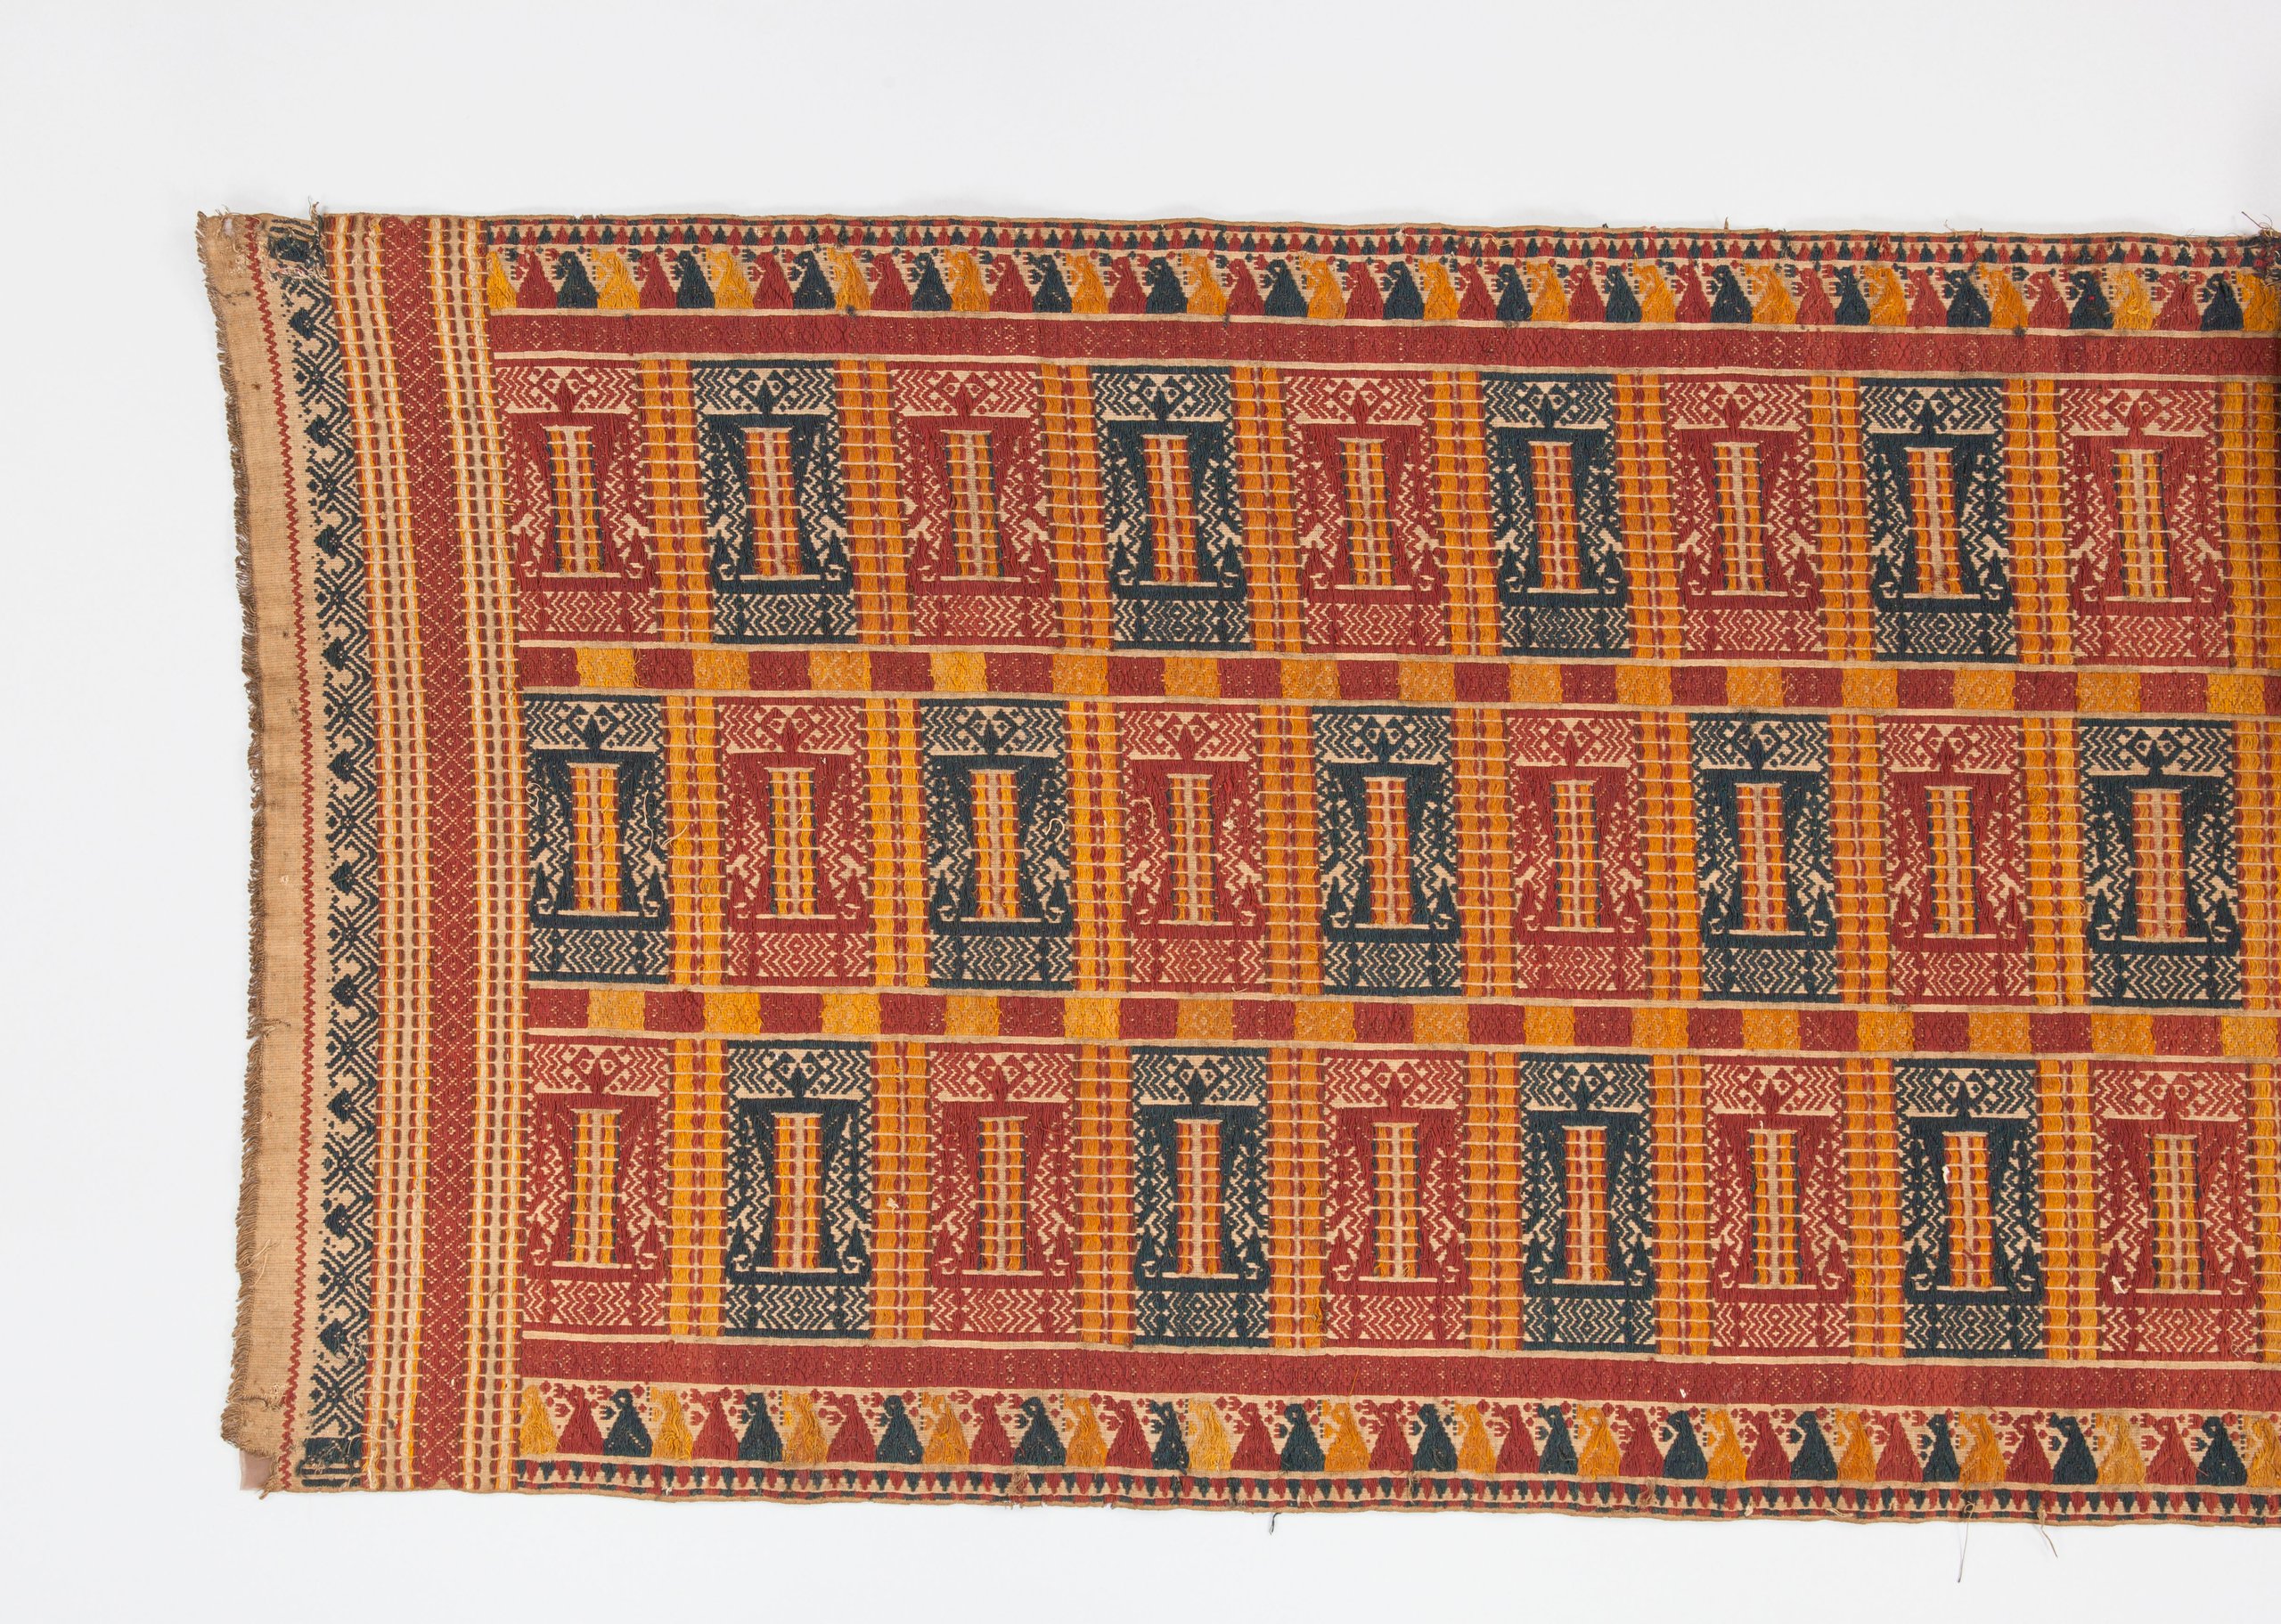 Late 18th century textile from Indonesia